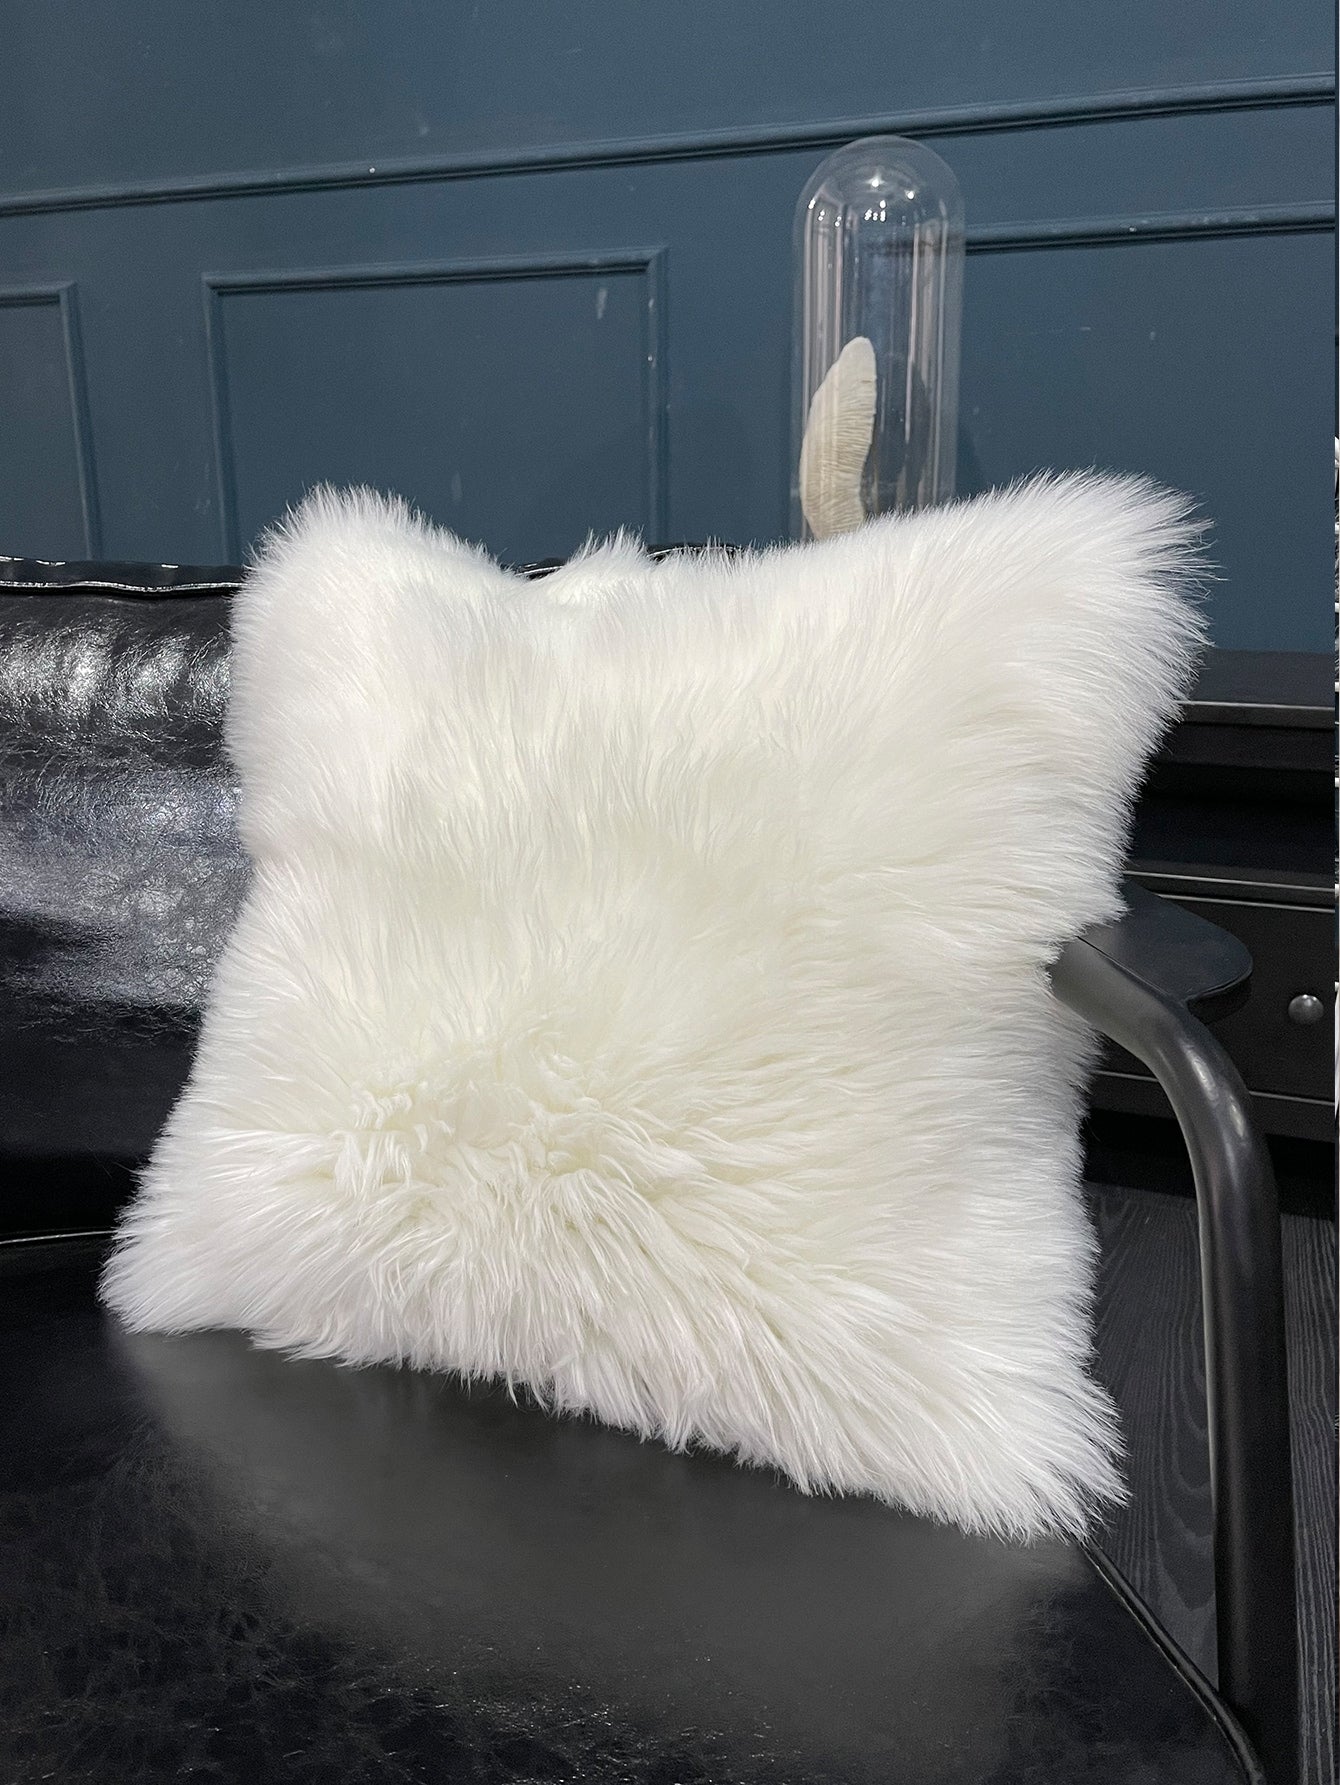 Plush Shaggy Cushion Cover Without Filler